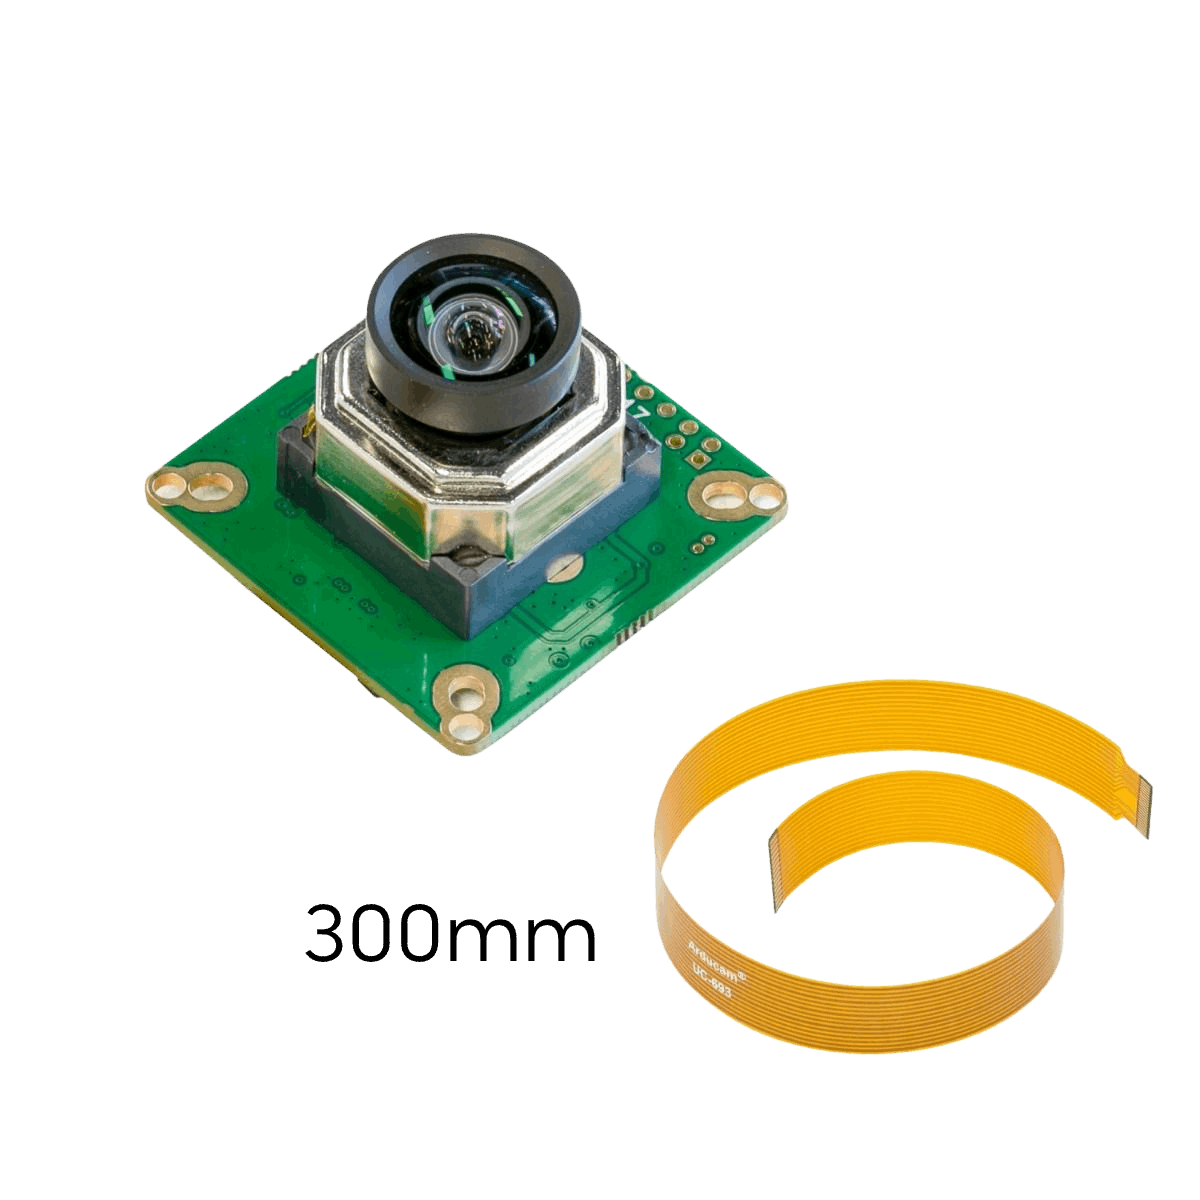 Arducam B0273 12.3MP IMX477 Motorised camera module with its 300mm ribbon cable